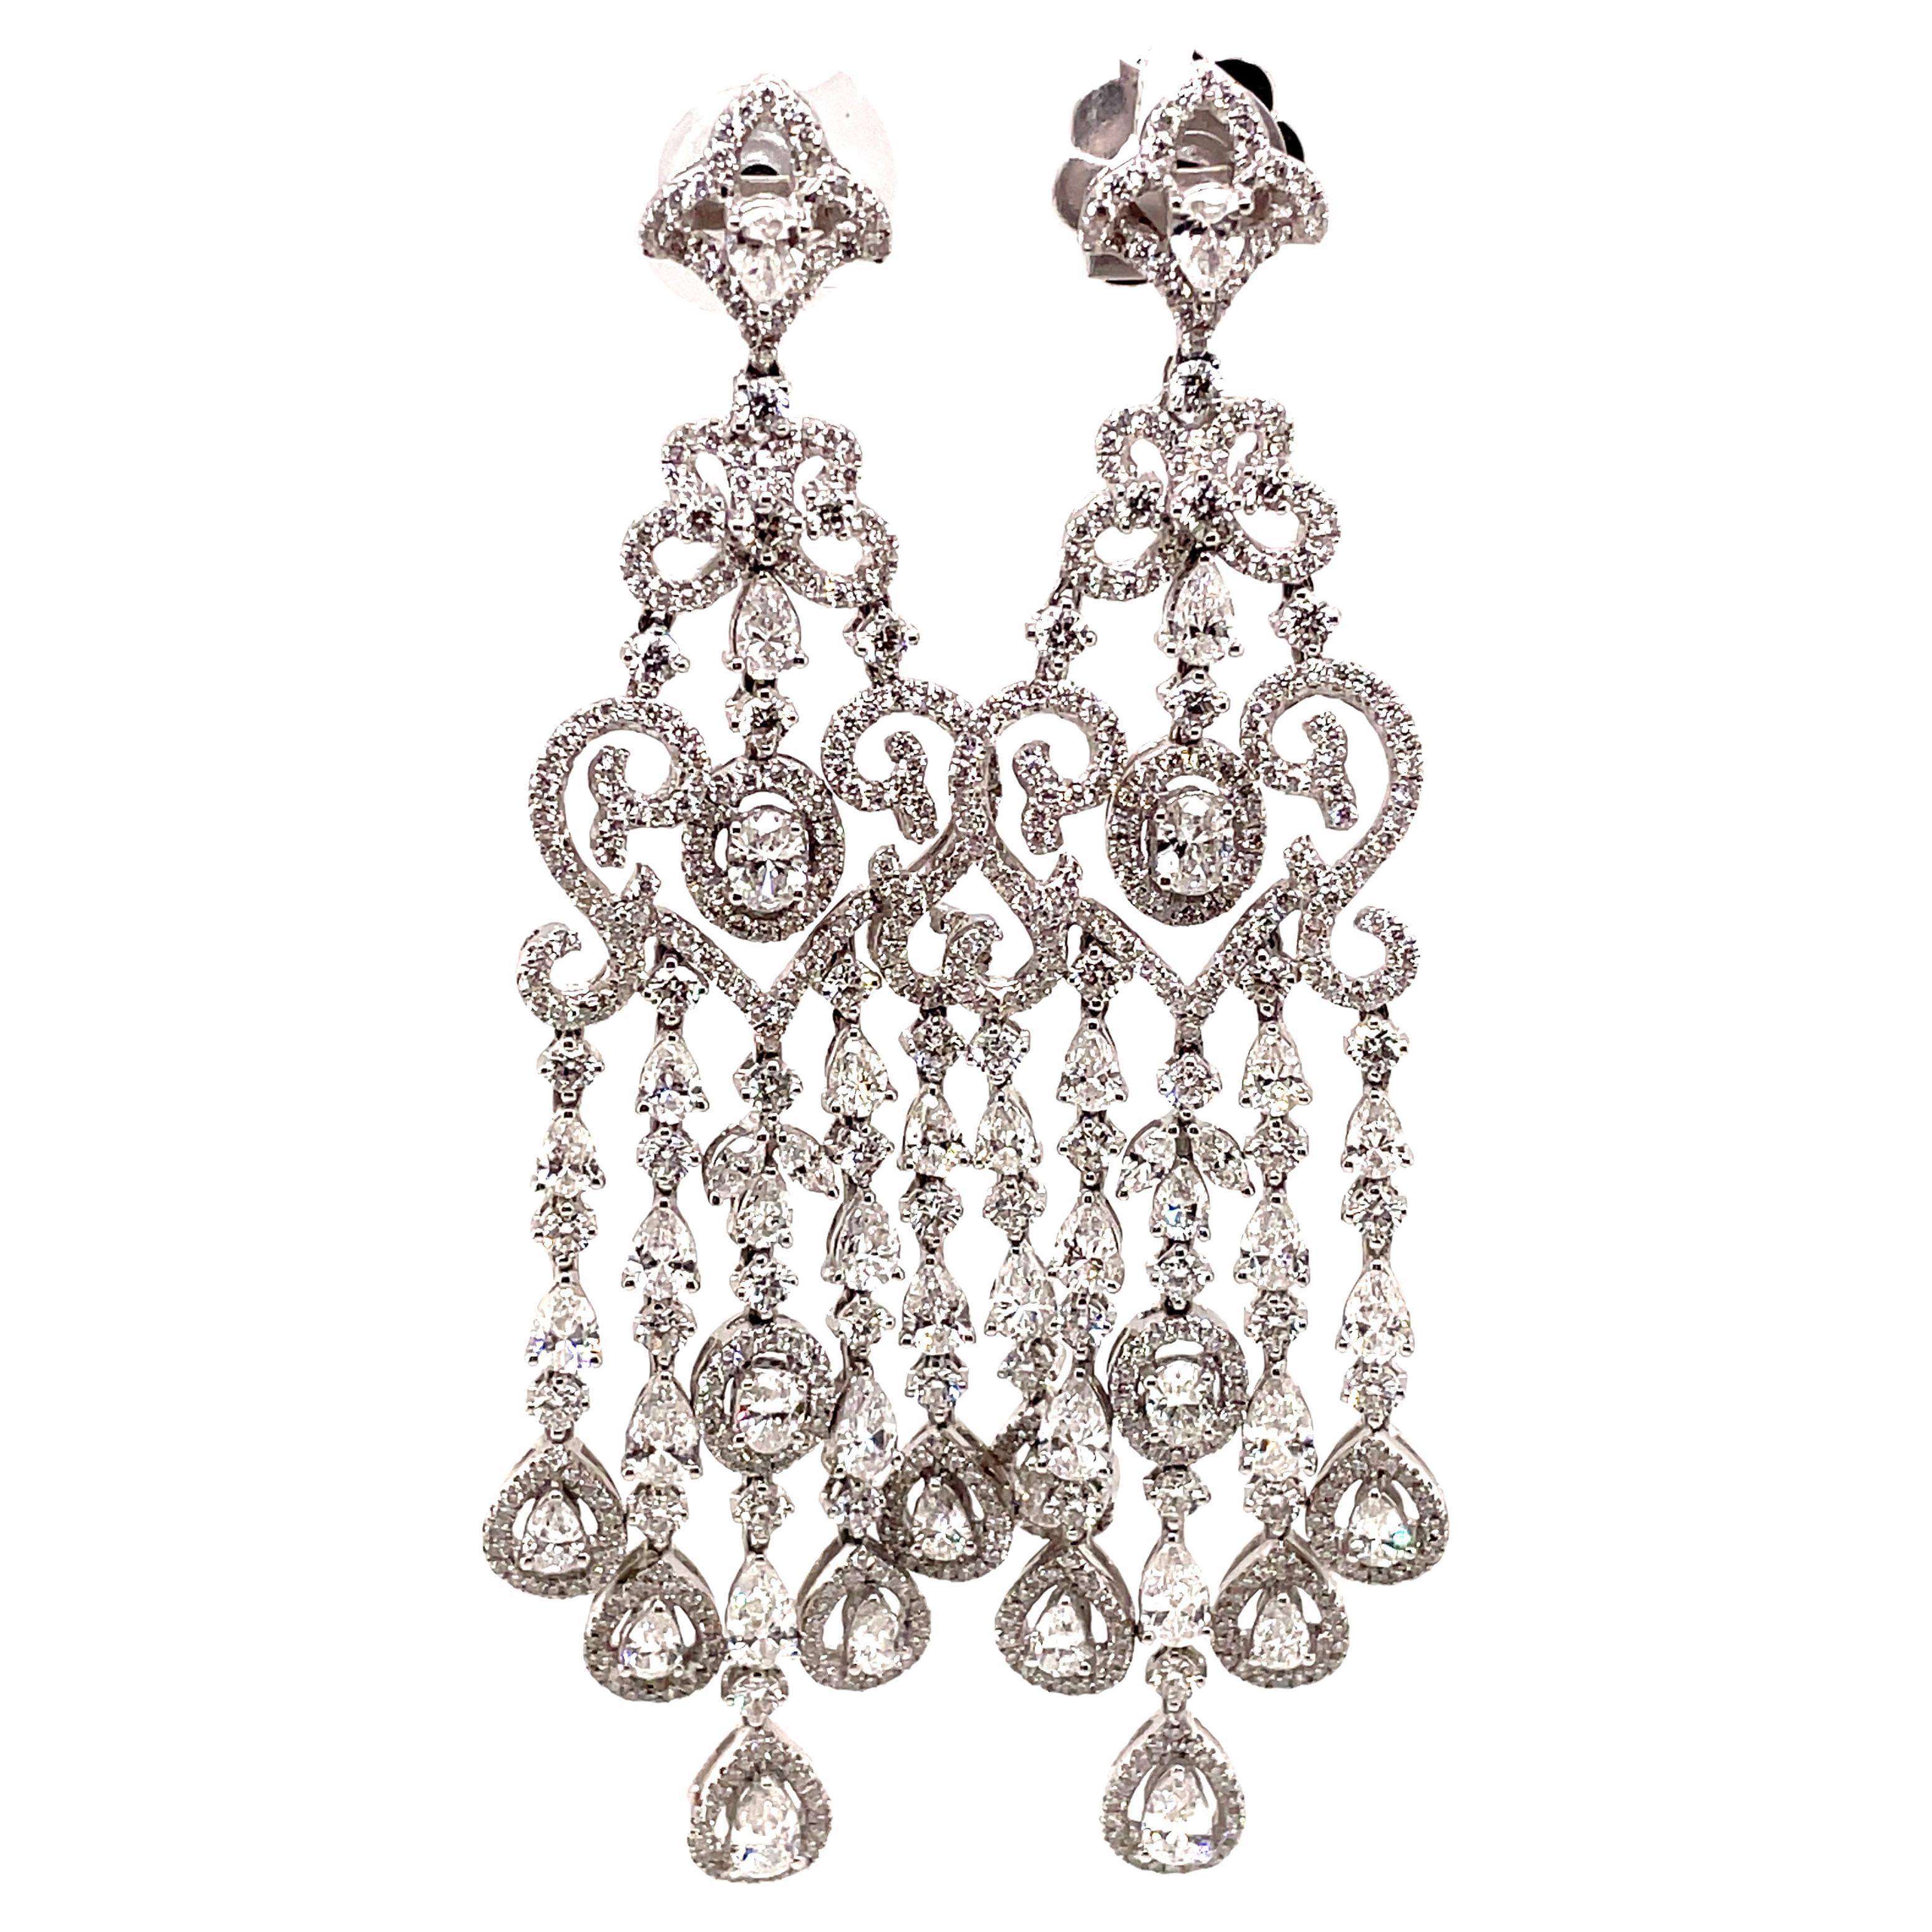 9.60ct Oval, Pear, Round, & Marques Diamond Chandelier Earrings 18k White Gold For Sale